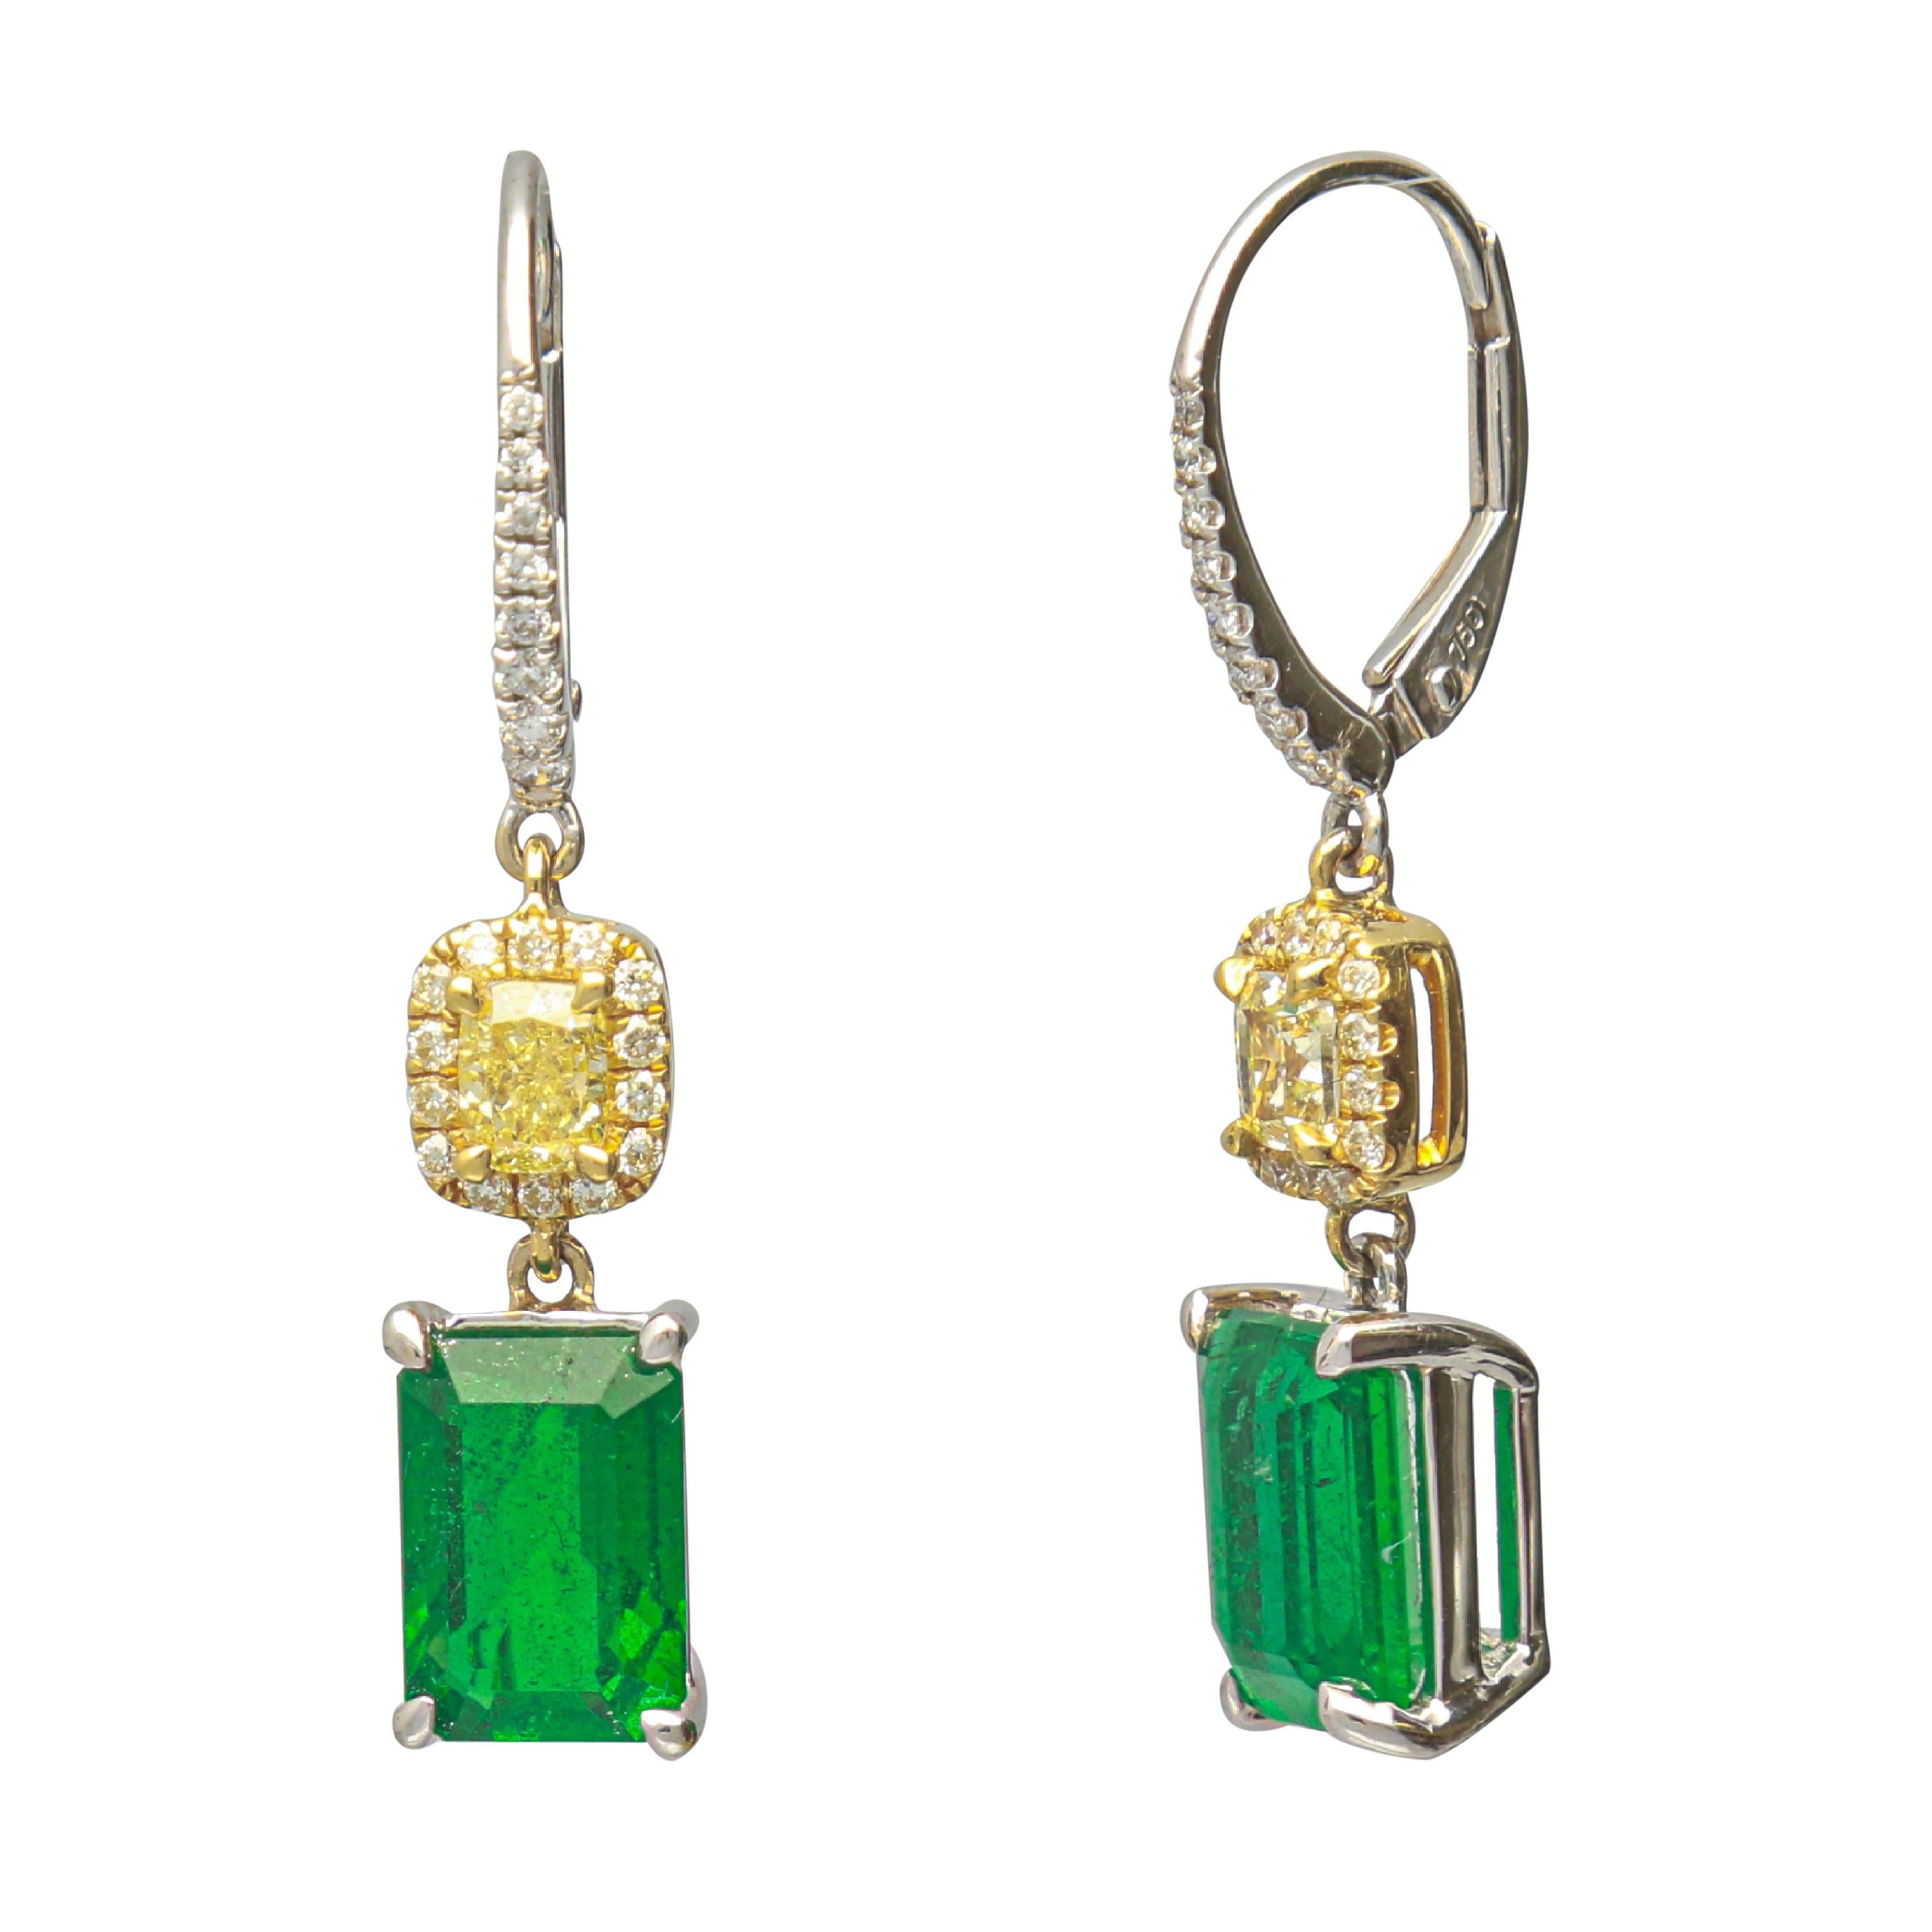 This one of a kind Lever back Earring is crafted in 18-karat White and Yellow Gold and features 2 Emerald cut Emeralds 3.81 Carat, 2 Yellow Diamond 0.60 Carat, 28 Yellow Diamond 0.17 Carat & 16 Brilliant cut Round Diamonds 0.11 Carat. This Earring